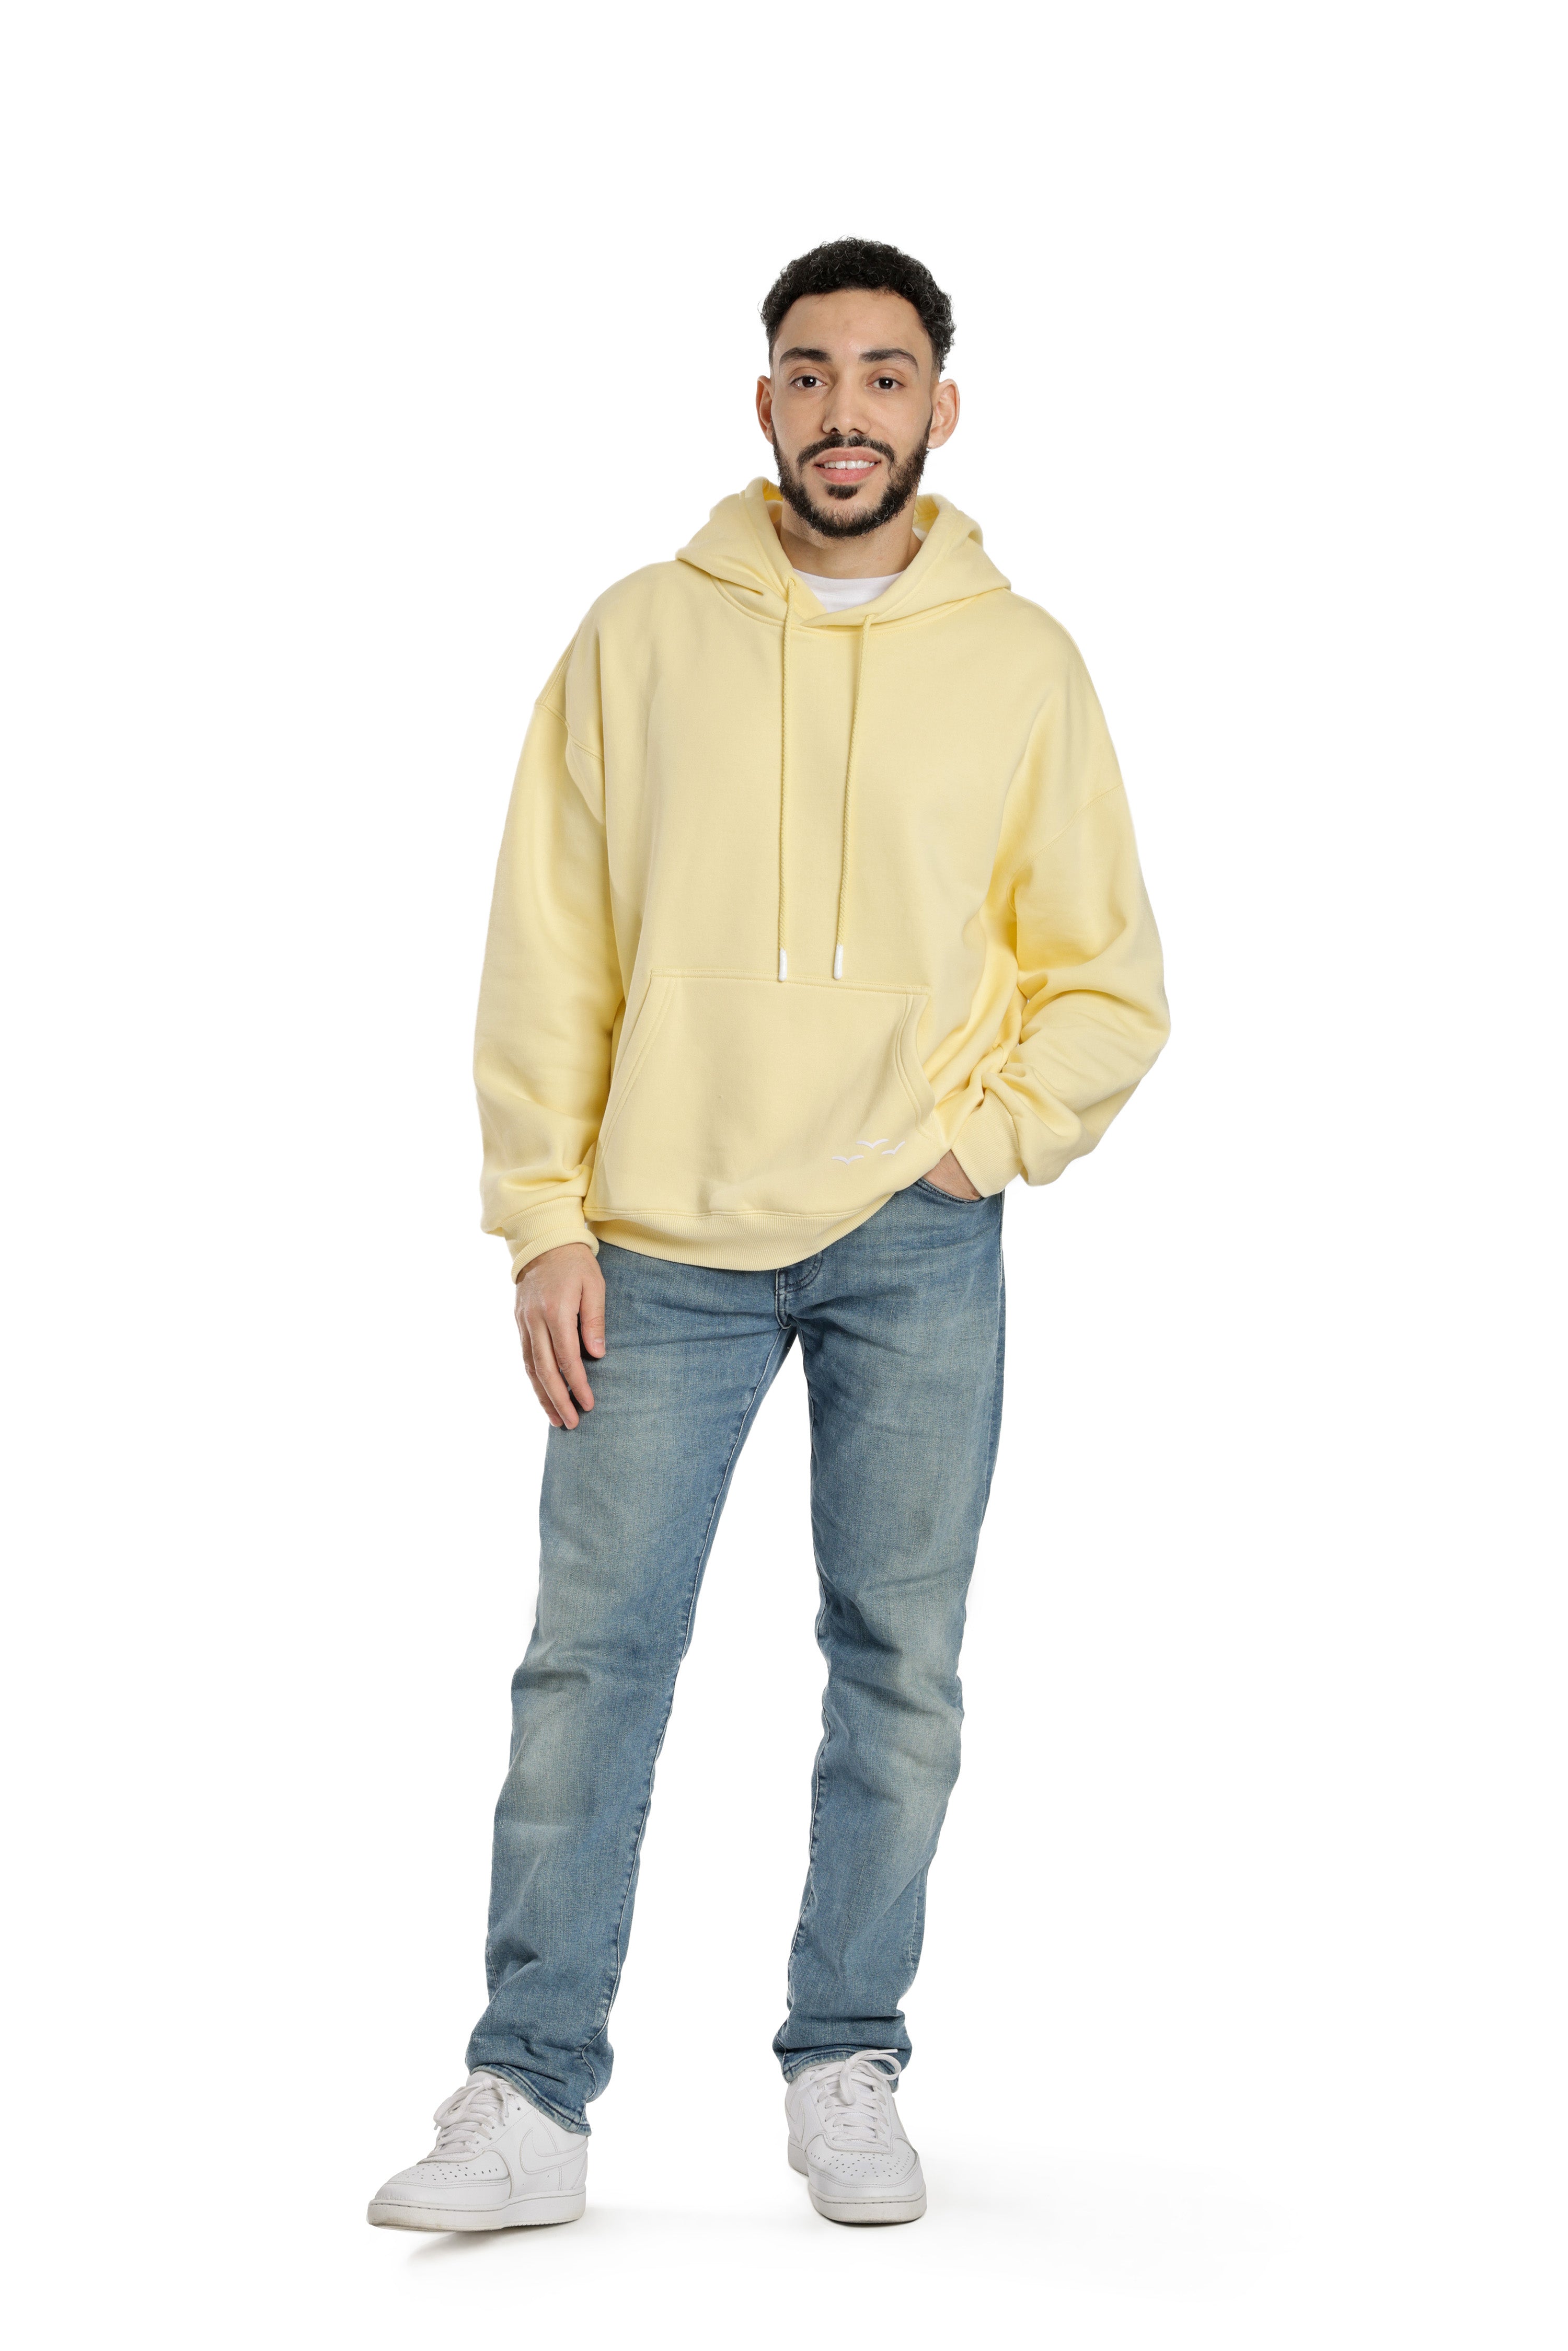 Men's Relaxed Fit Hoodie in banana yellow